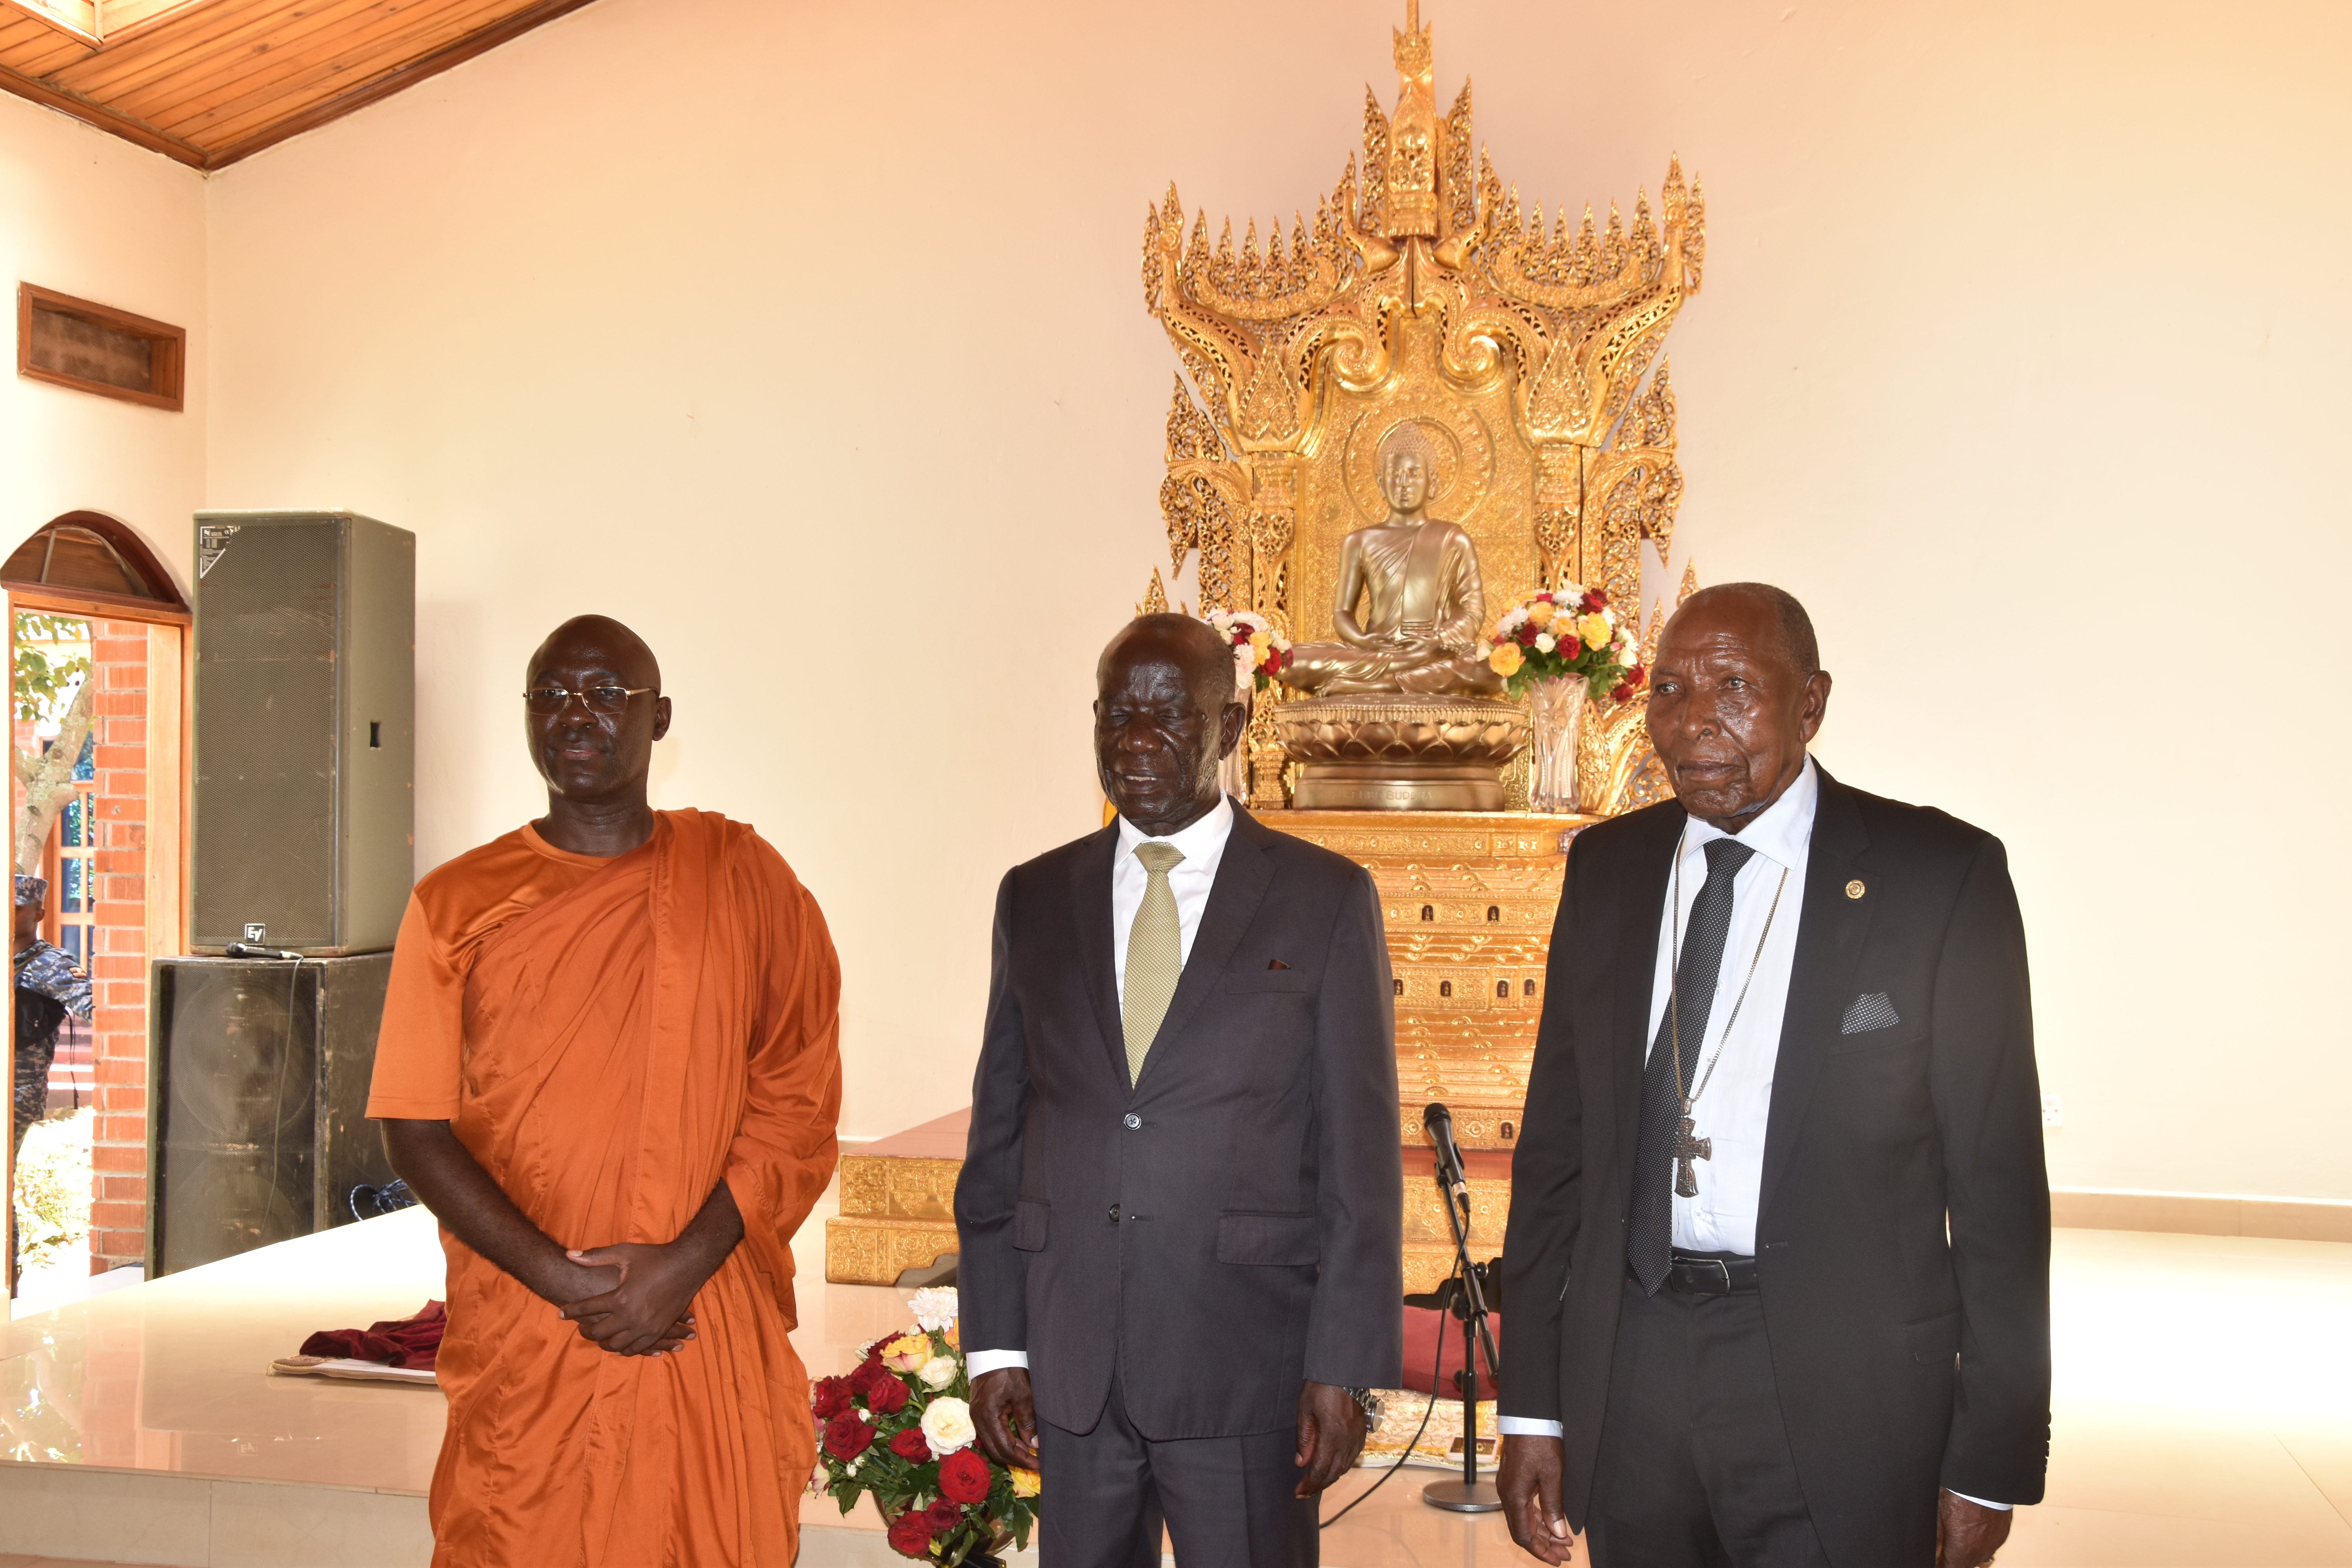 Vice President Visits the Temple, Calls for Adoption of Buddhist Values